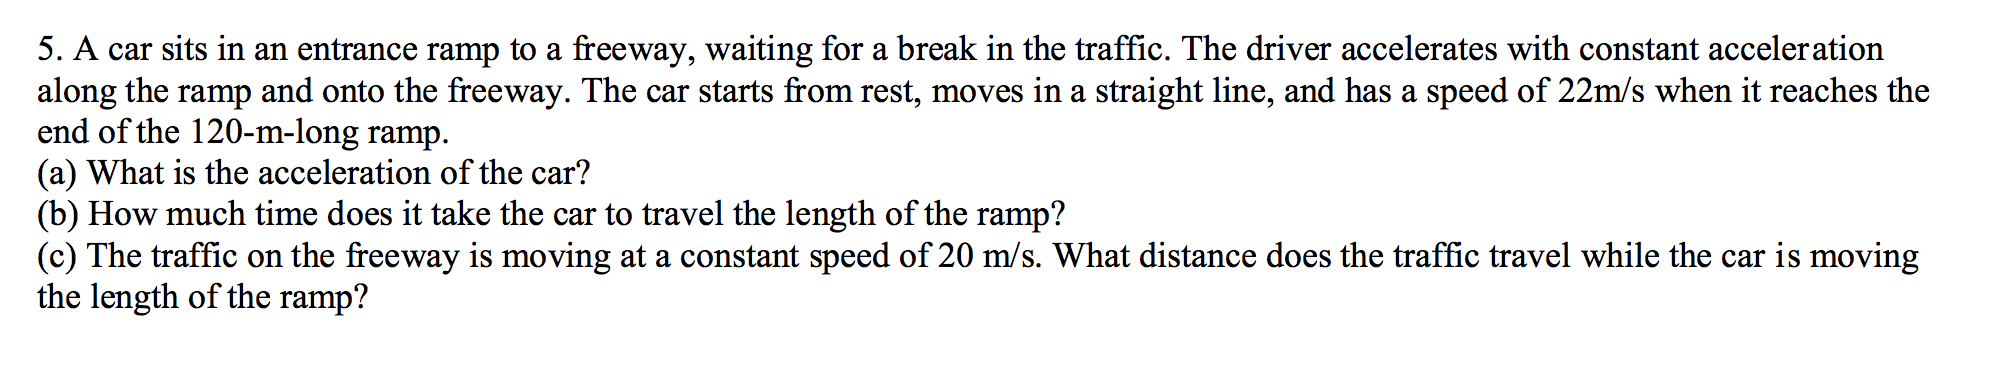 5. A car sits in an entrance ramp to a freeway, waiting for a break in the traffic. The driver accelerates with constant acceleration
along the ramp and onto the freeway. The car starts from rest, moves in a straight line, and has a speed of 22m/s when it reaches the
end of the 120-m-long ramp
(a) What is the acceleration of the car?
(b) How much time does it take the car to travel the length of the ramp?
(c) The traffic on the freeway is moving at a constant speed of 20 m/s. What distance does the traffic travel while the car is moving
the length of the ramp?
а
